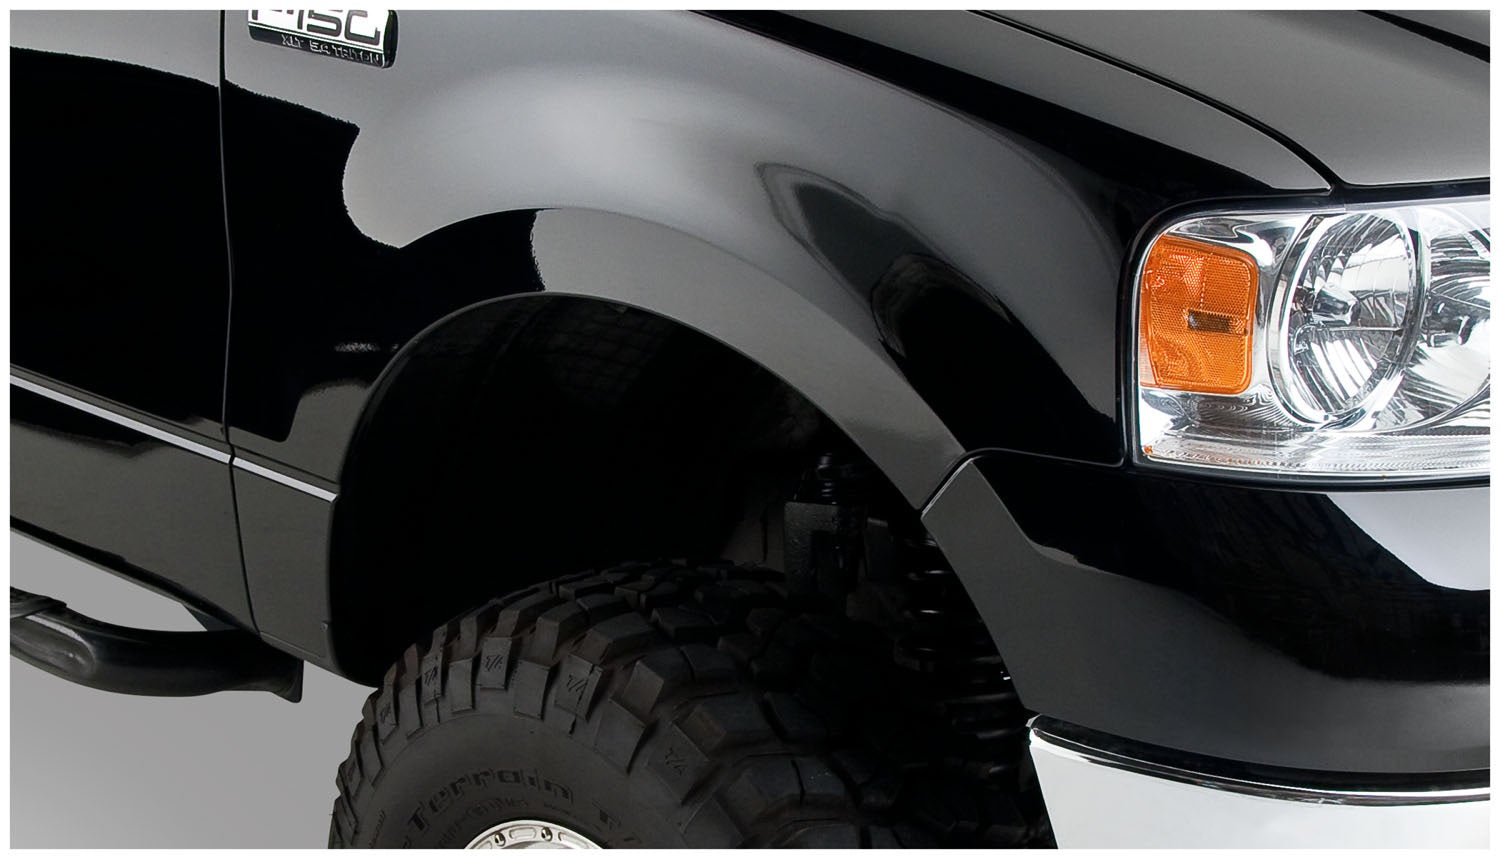 Bushwacker 20915-02 Black Extend-A-Fender Style Smooth Finish 4-Piece Fender Flare Set for 2004-2008 Ford F-150